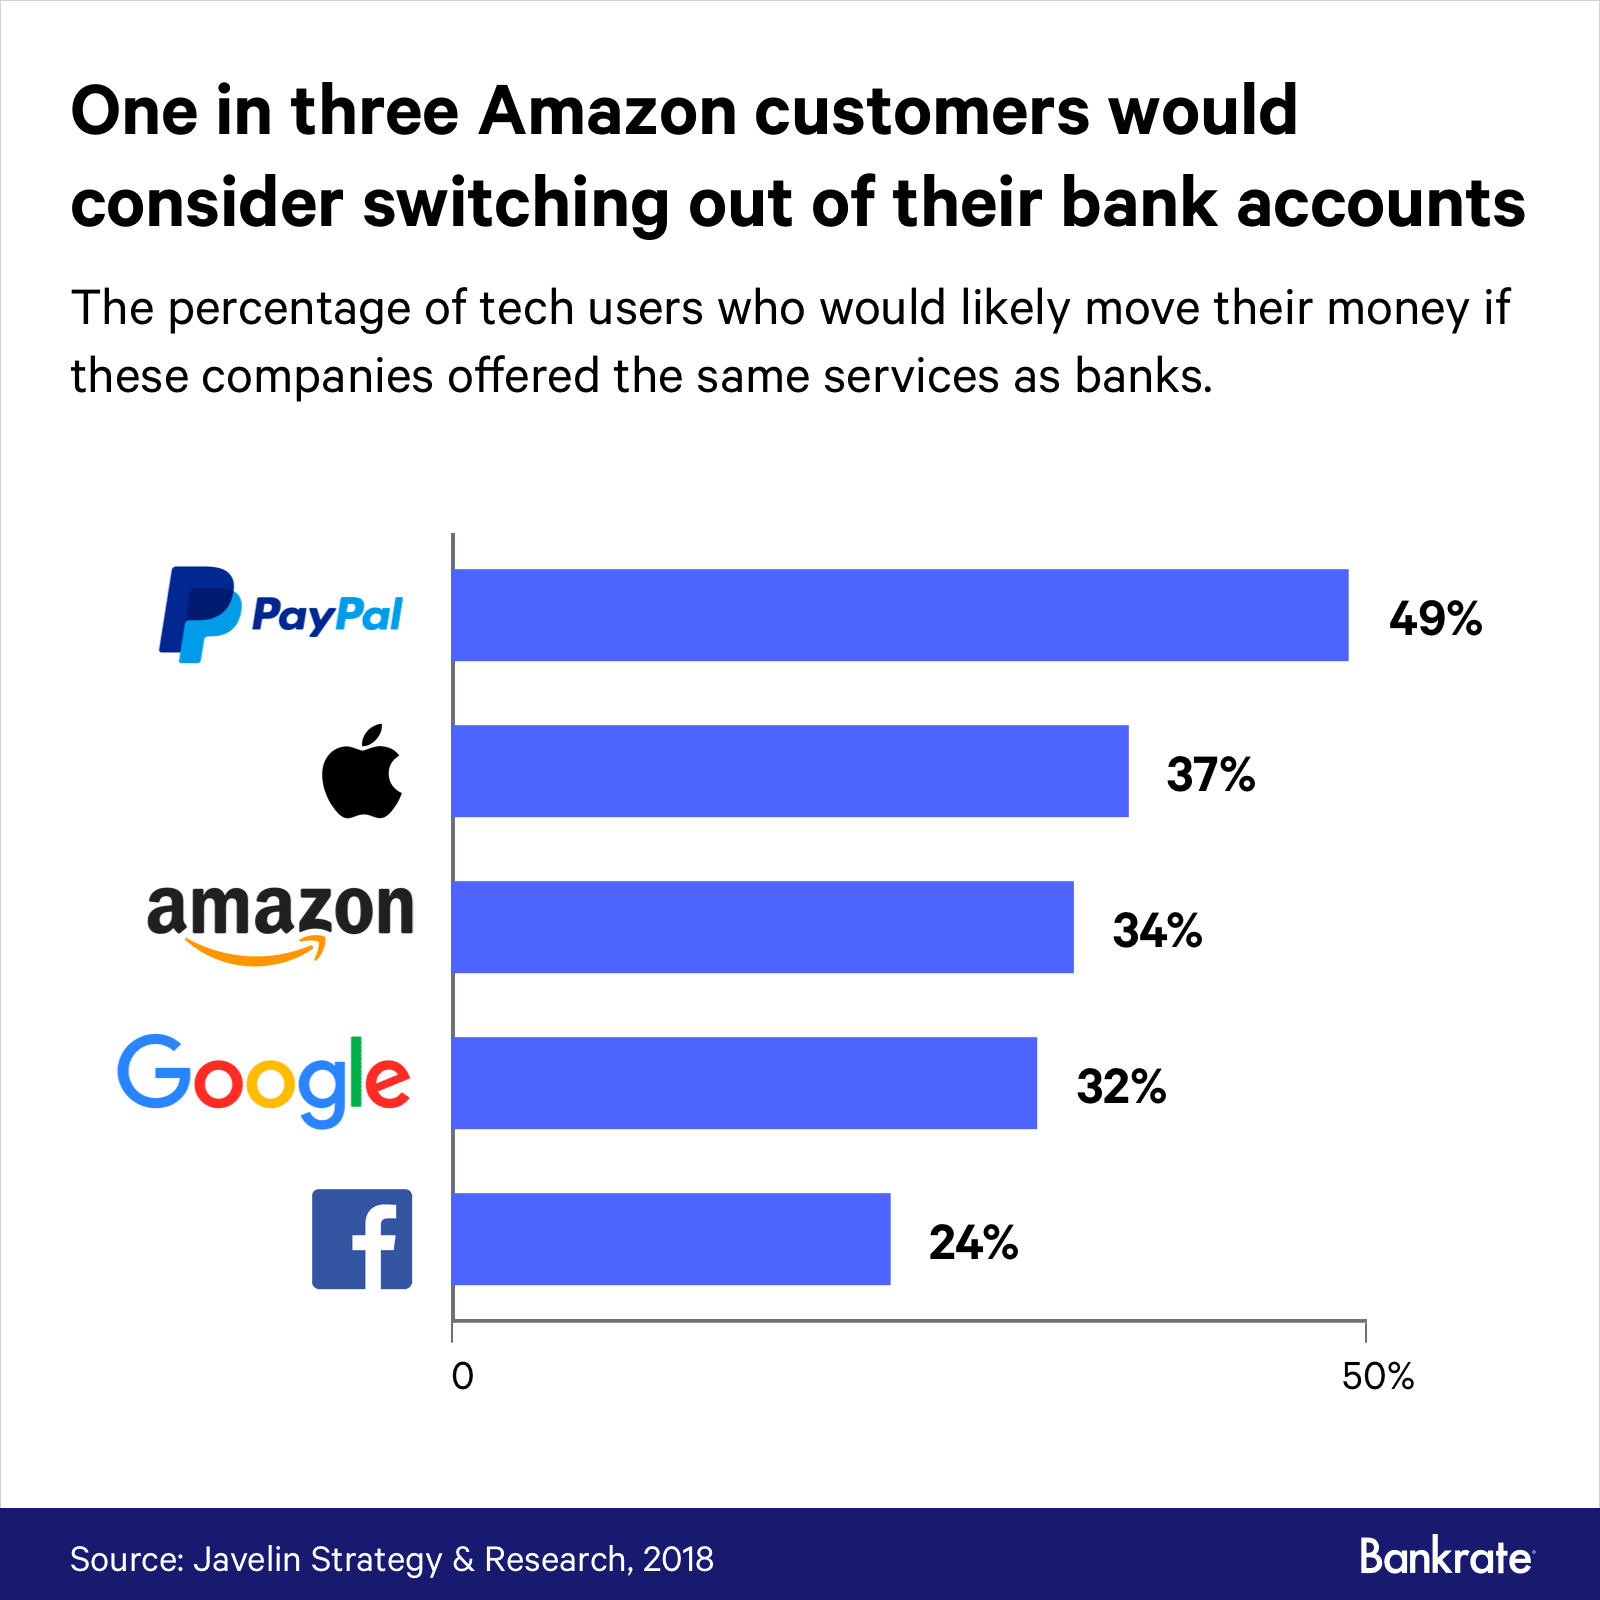 Graph: The percentage of tech users who would likely move their money if these companies offered the same services as banks.